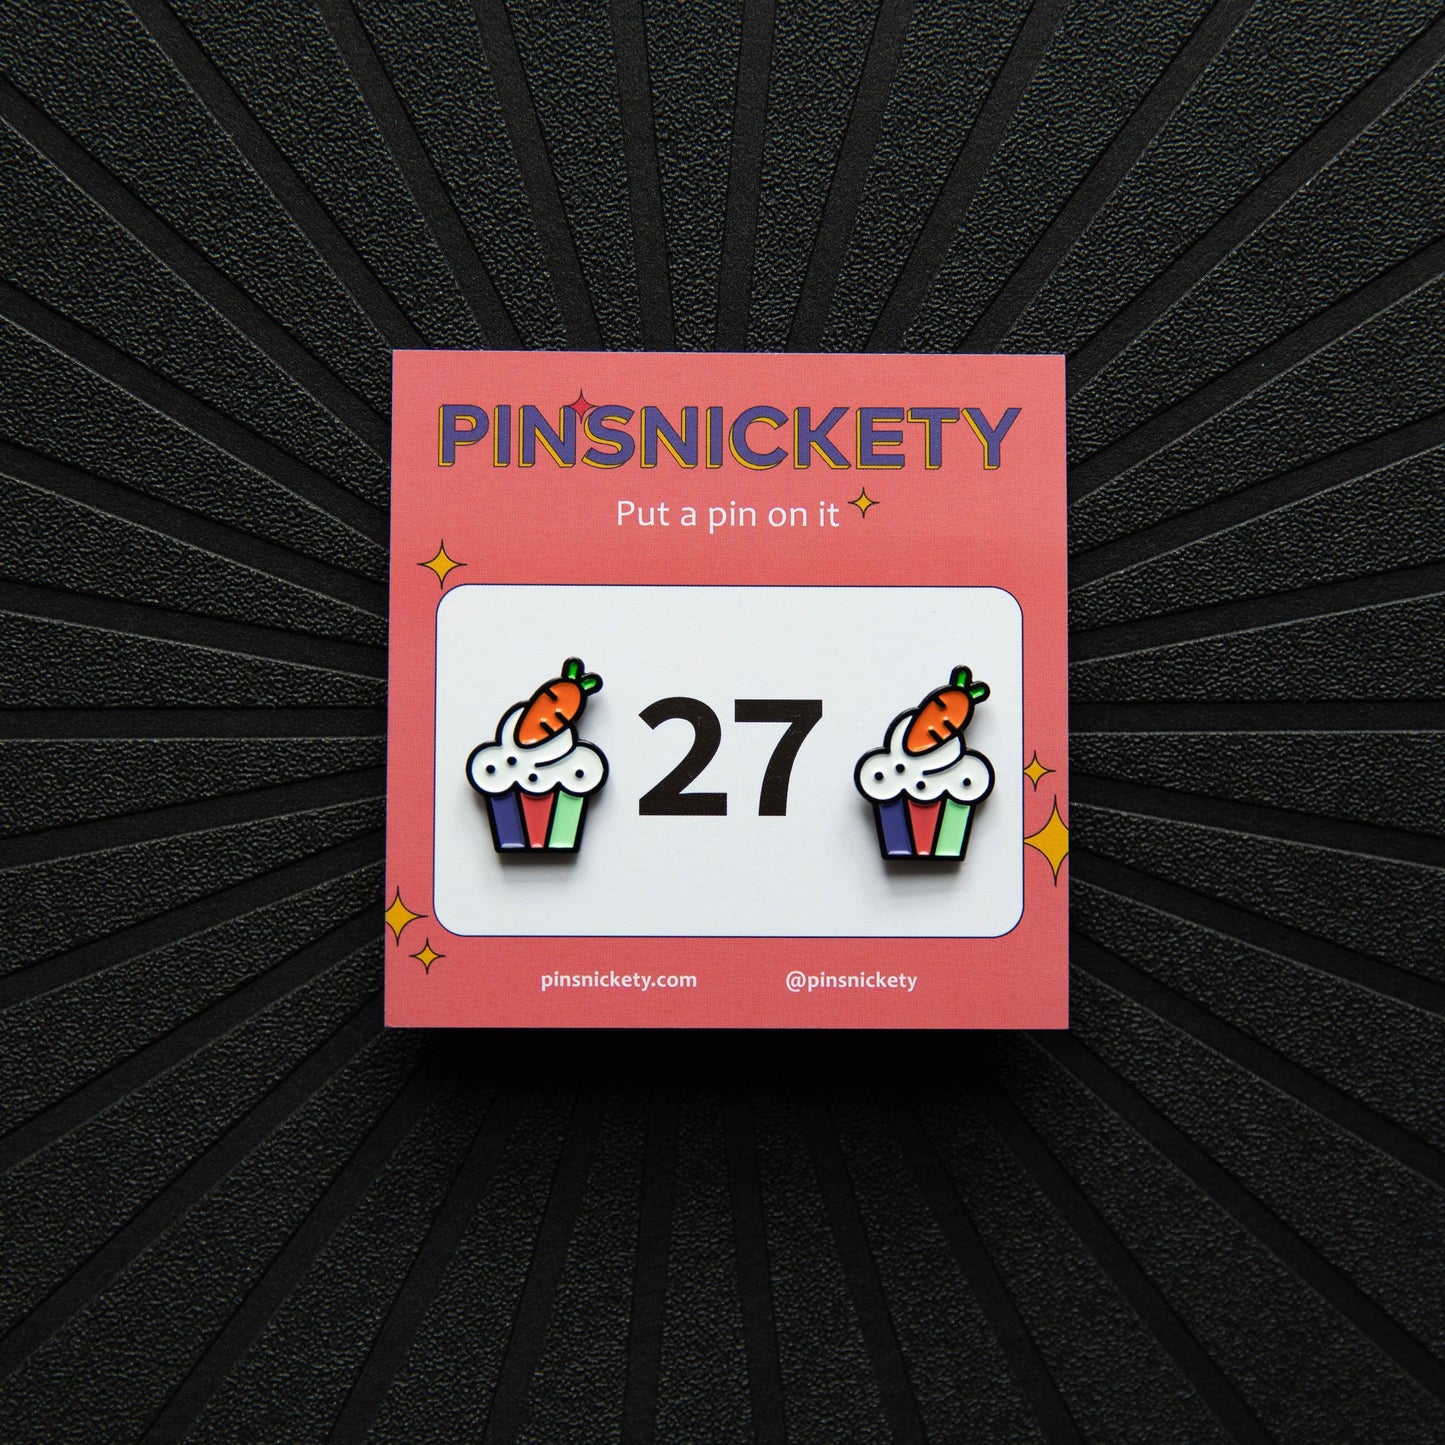 Pinsnickety Cupcake horse show number pins on their product packaging card